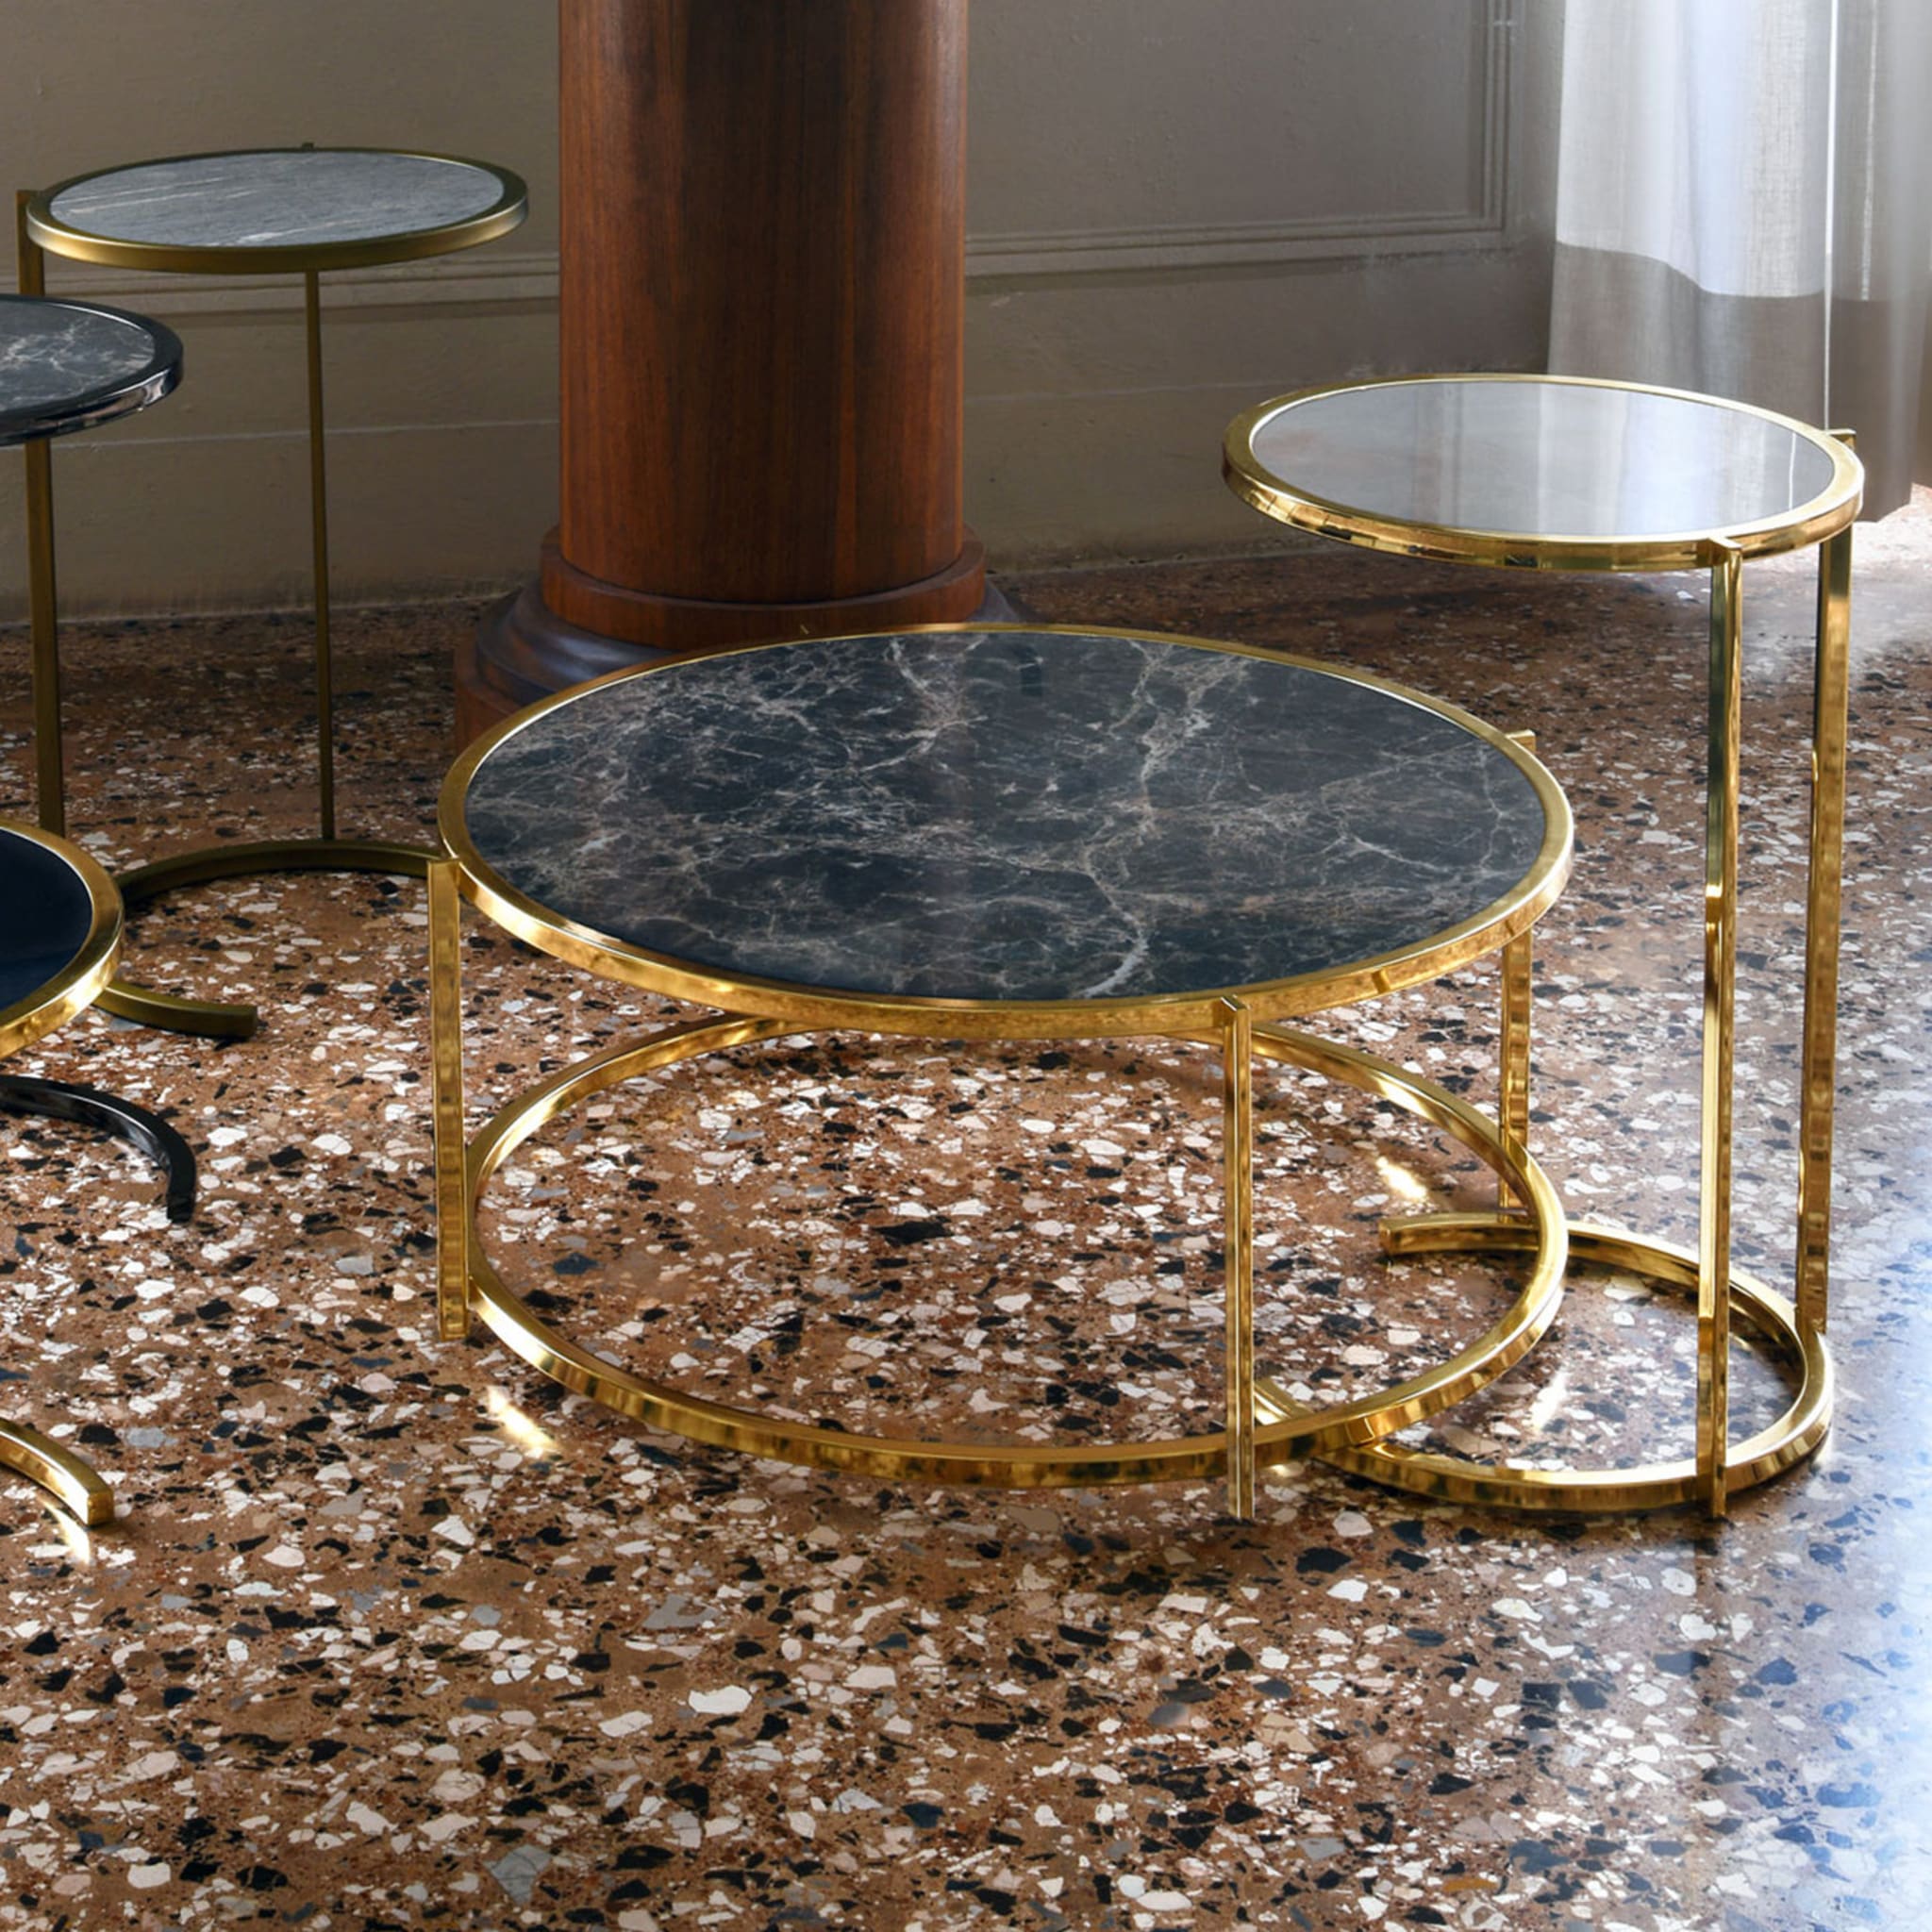 Teti Burnished Brass Accent Table  - Alternative view 2